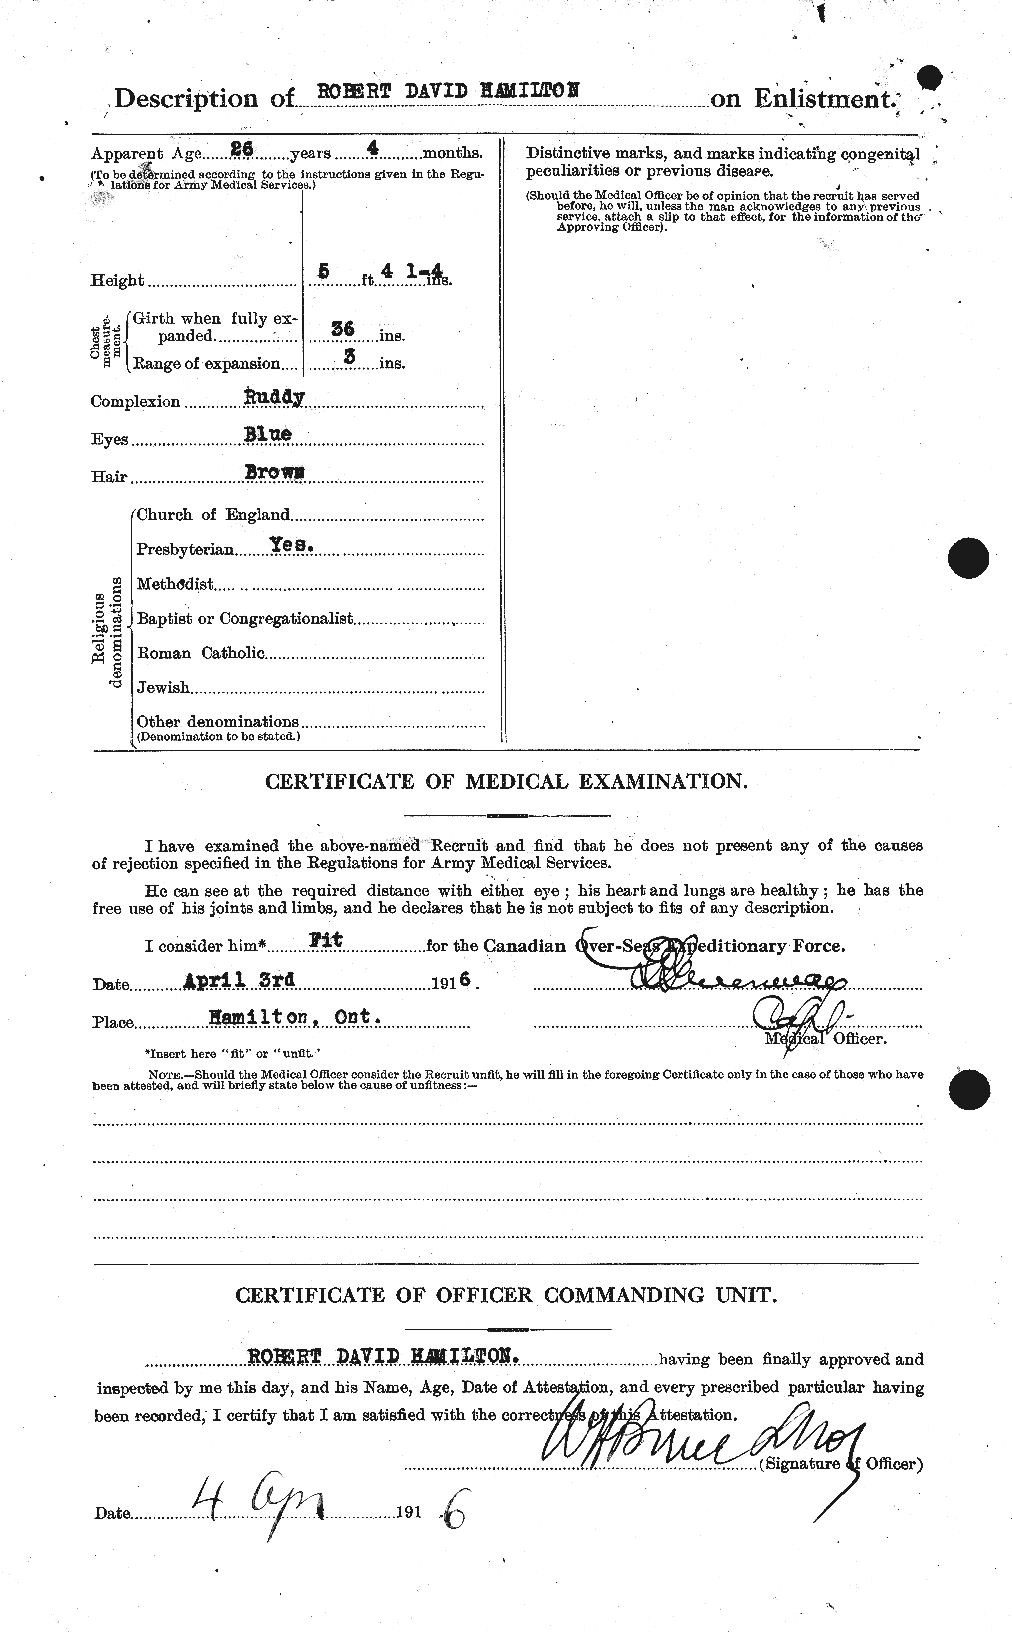 Personnel Records of the First World War - CEF 373254b